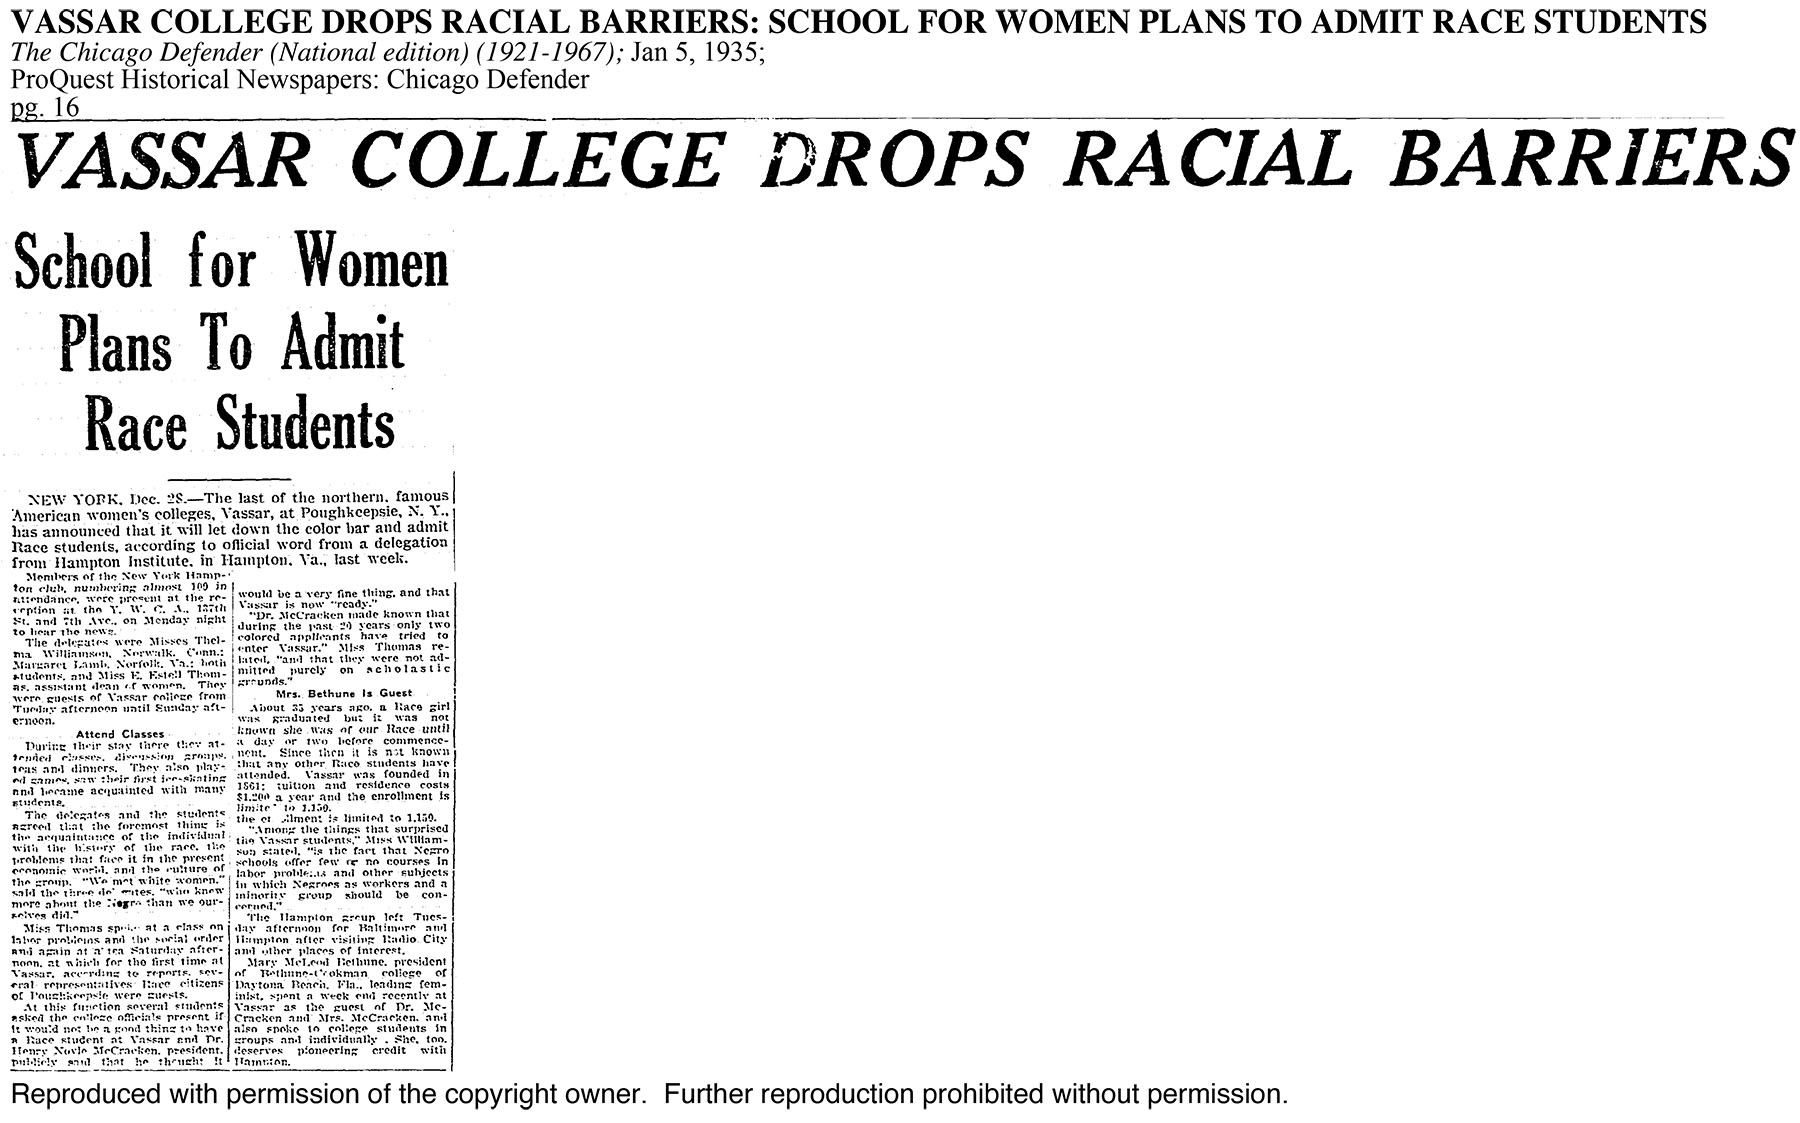 Original article scan for Vassar College Drops Racial Barriers: School for Women Plans to Admit Race Students; The Chicago Defender (National edition) (1921-1967); Jan 5, 1935; ProQuest Historical Newspapers: Chicago Defender pg. 16